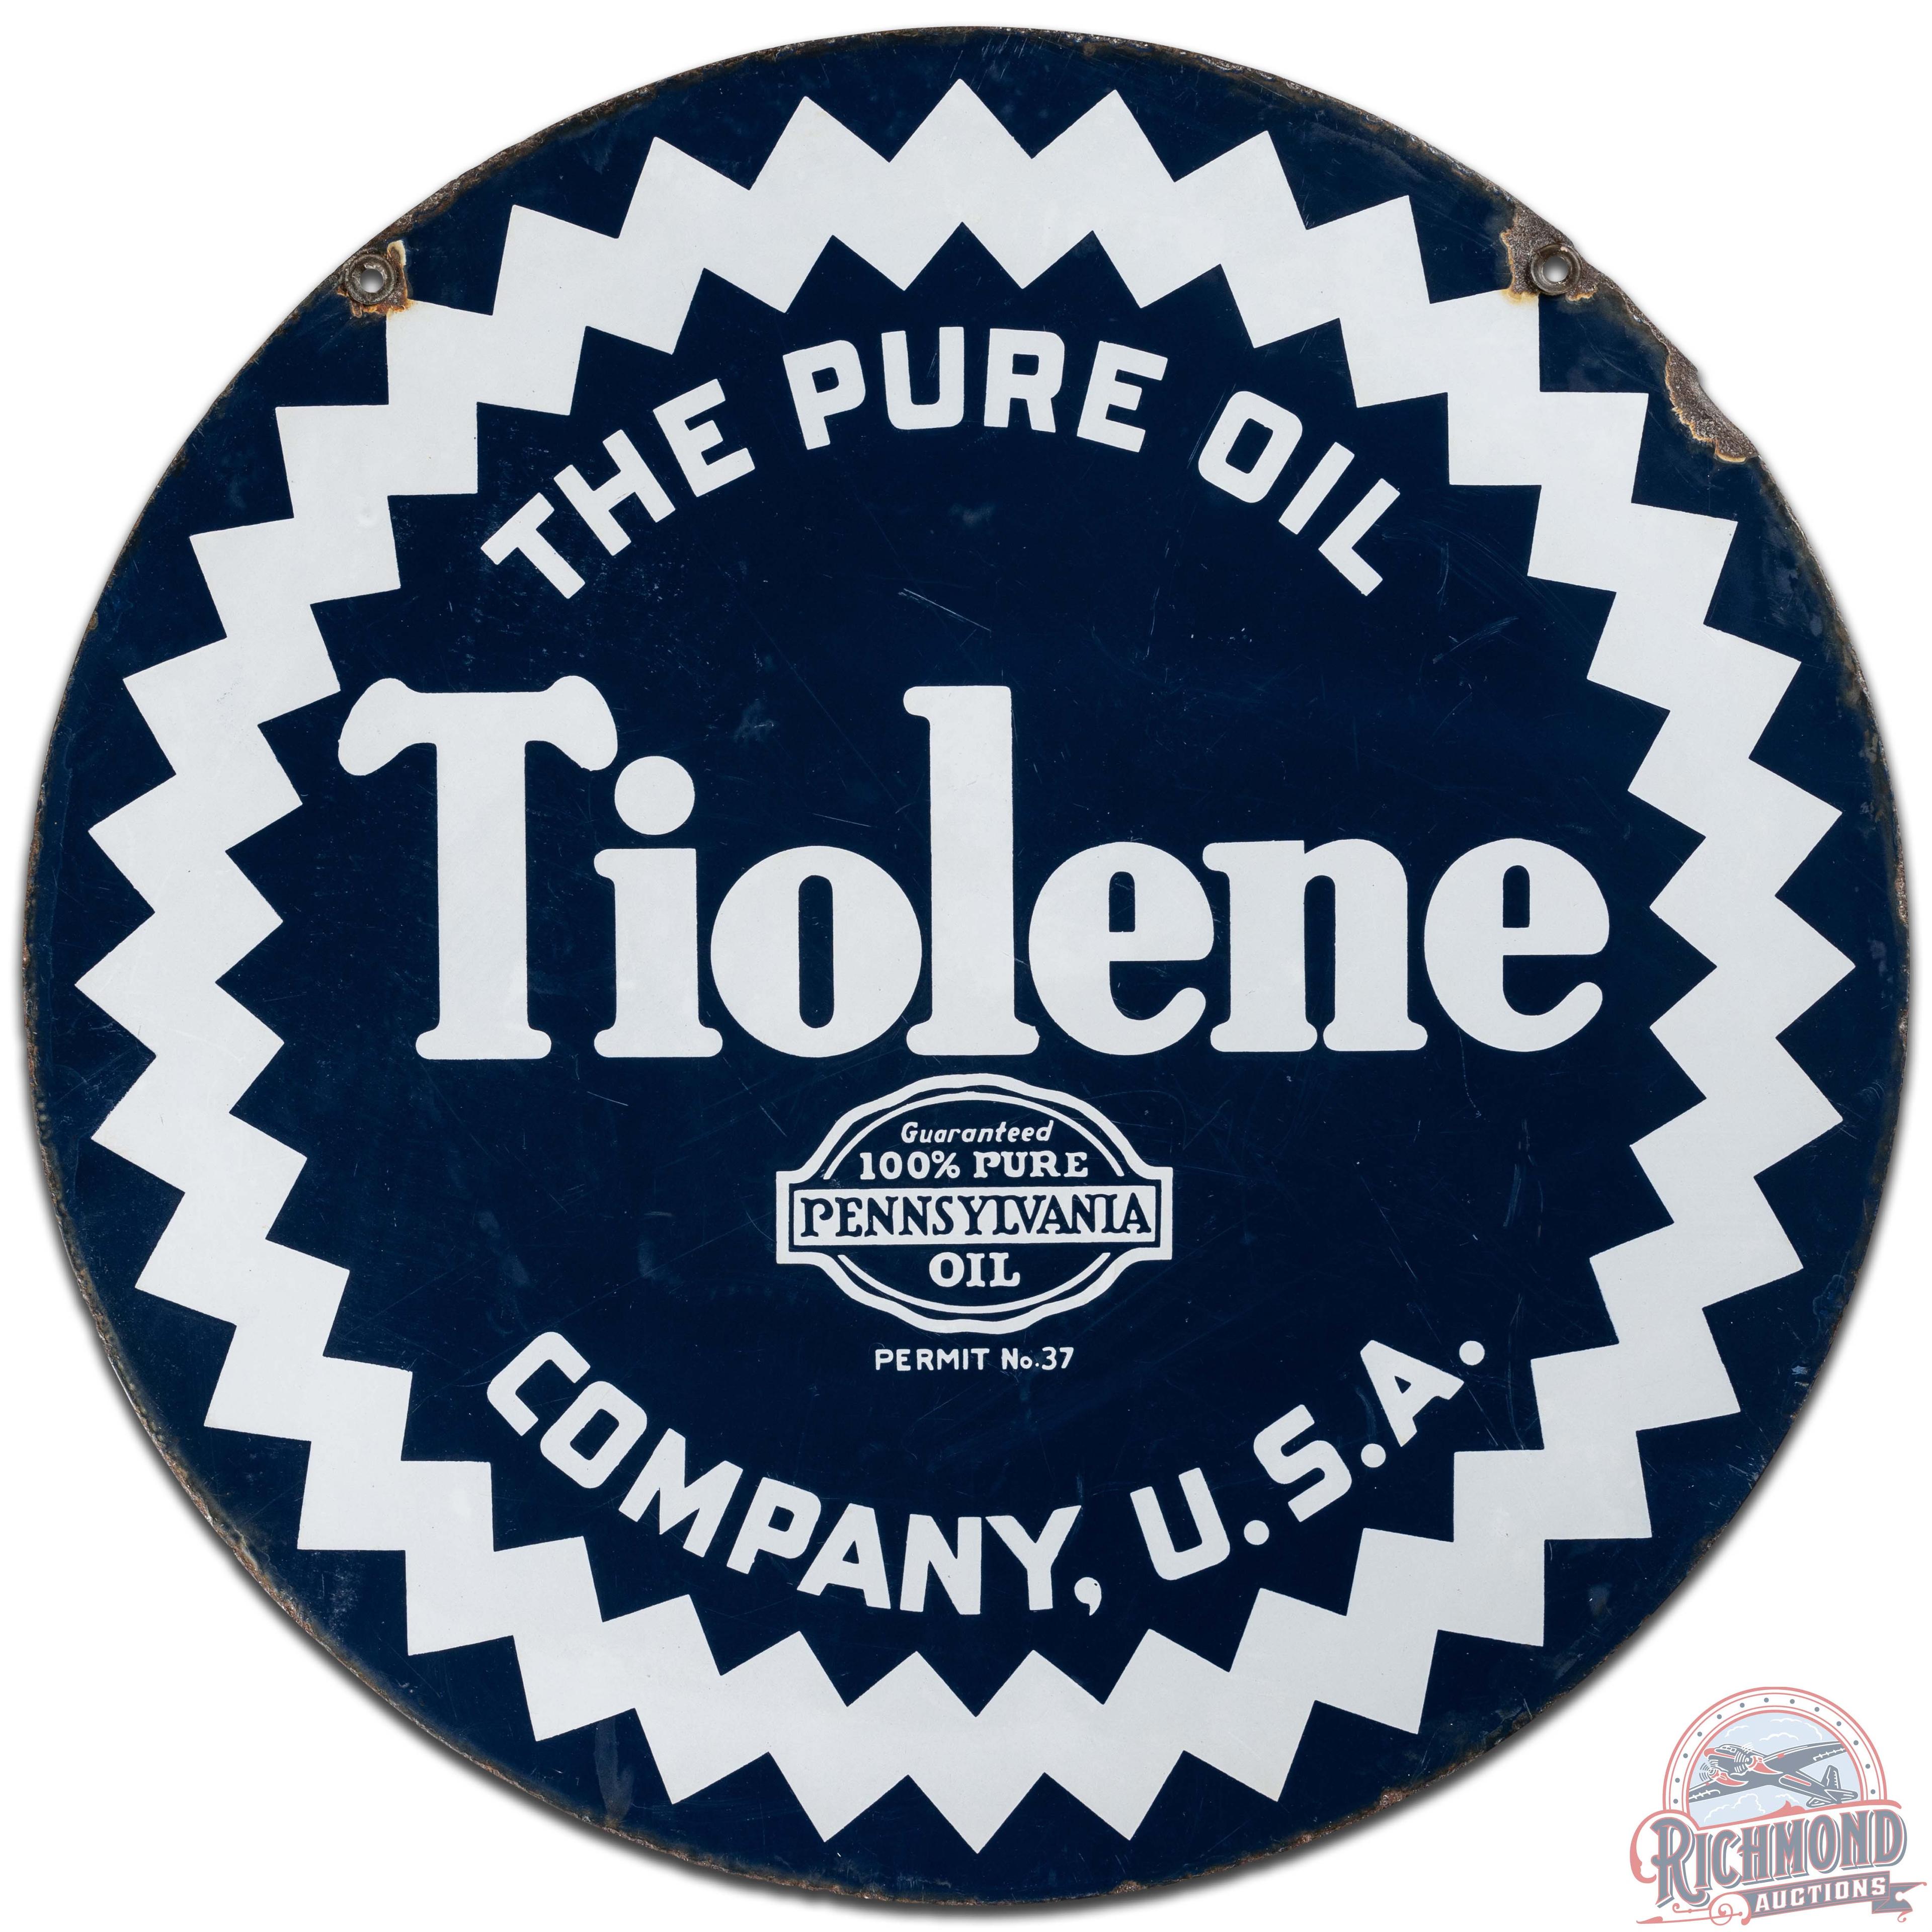 Tiolene The Pure Oil Company 25" DS Porcelain Sign